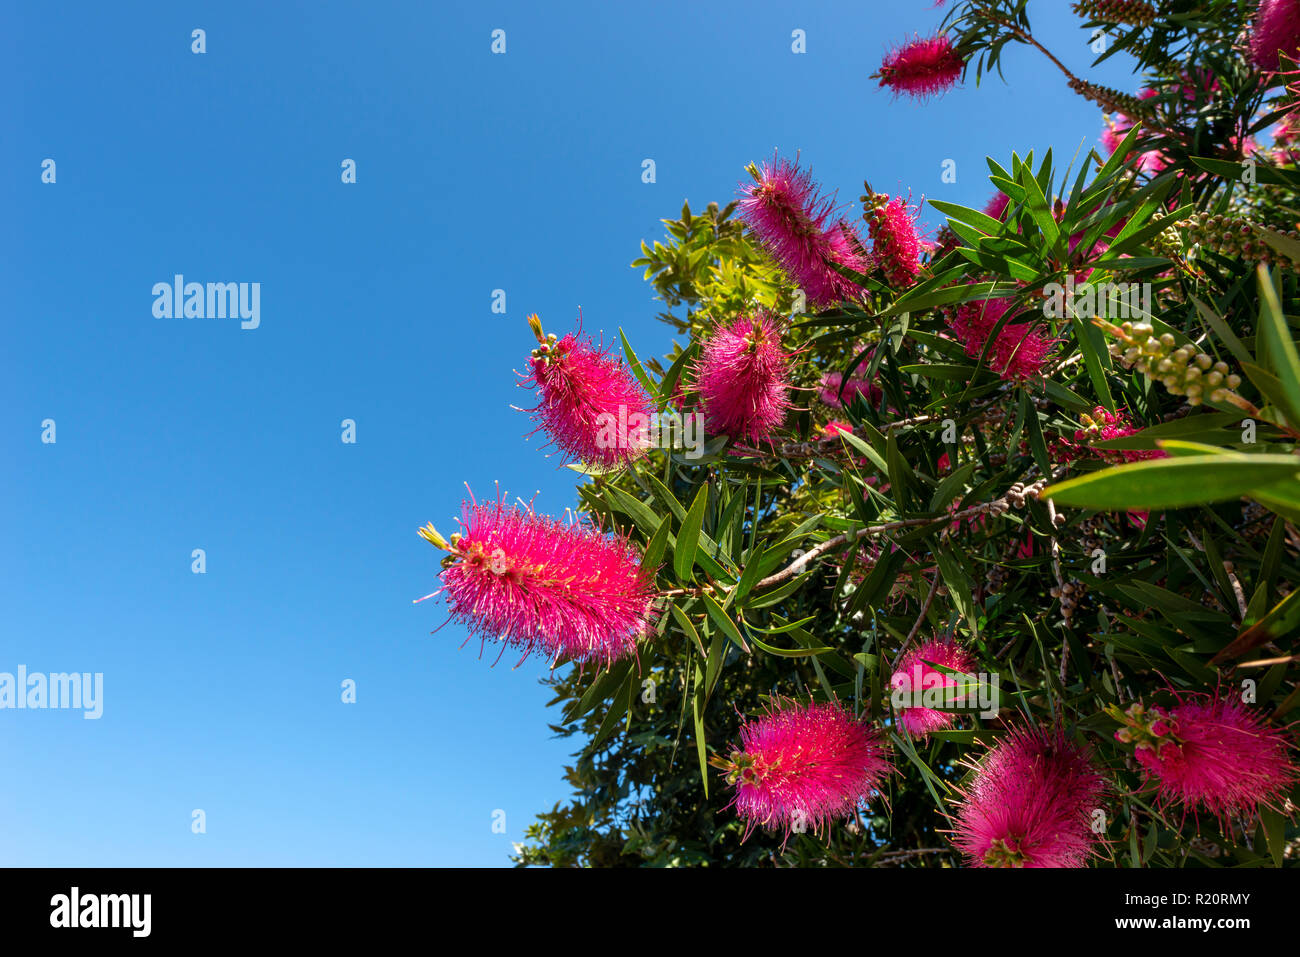 Red flowers on a tree in Knysna, South Africa Stock Photo